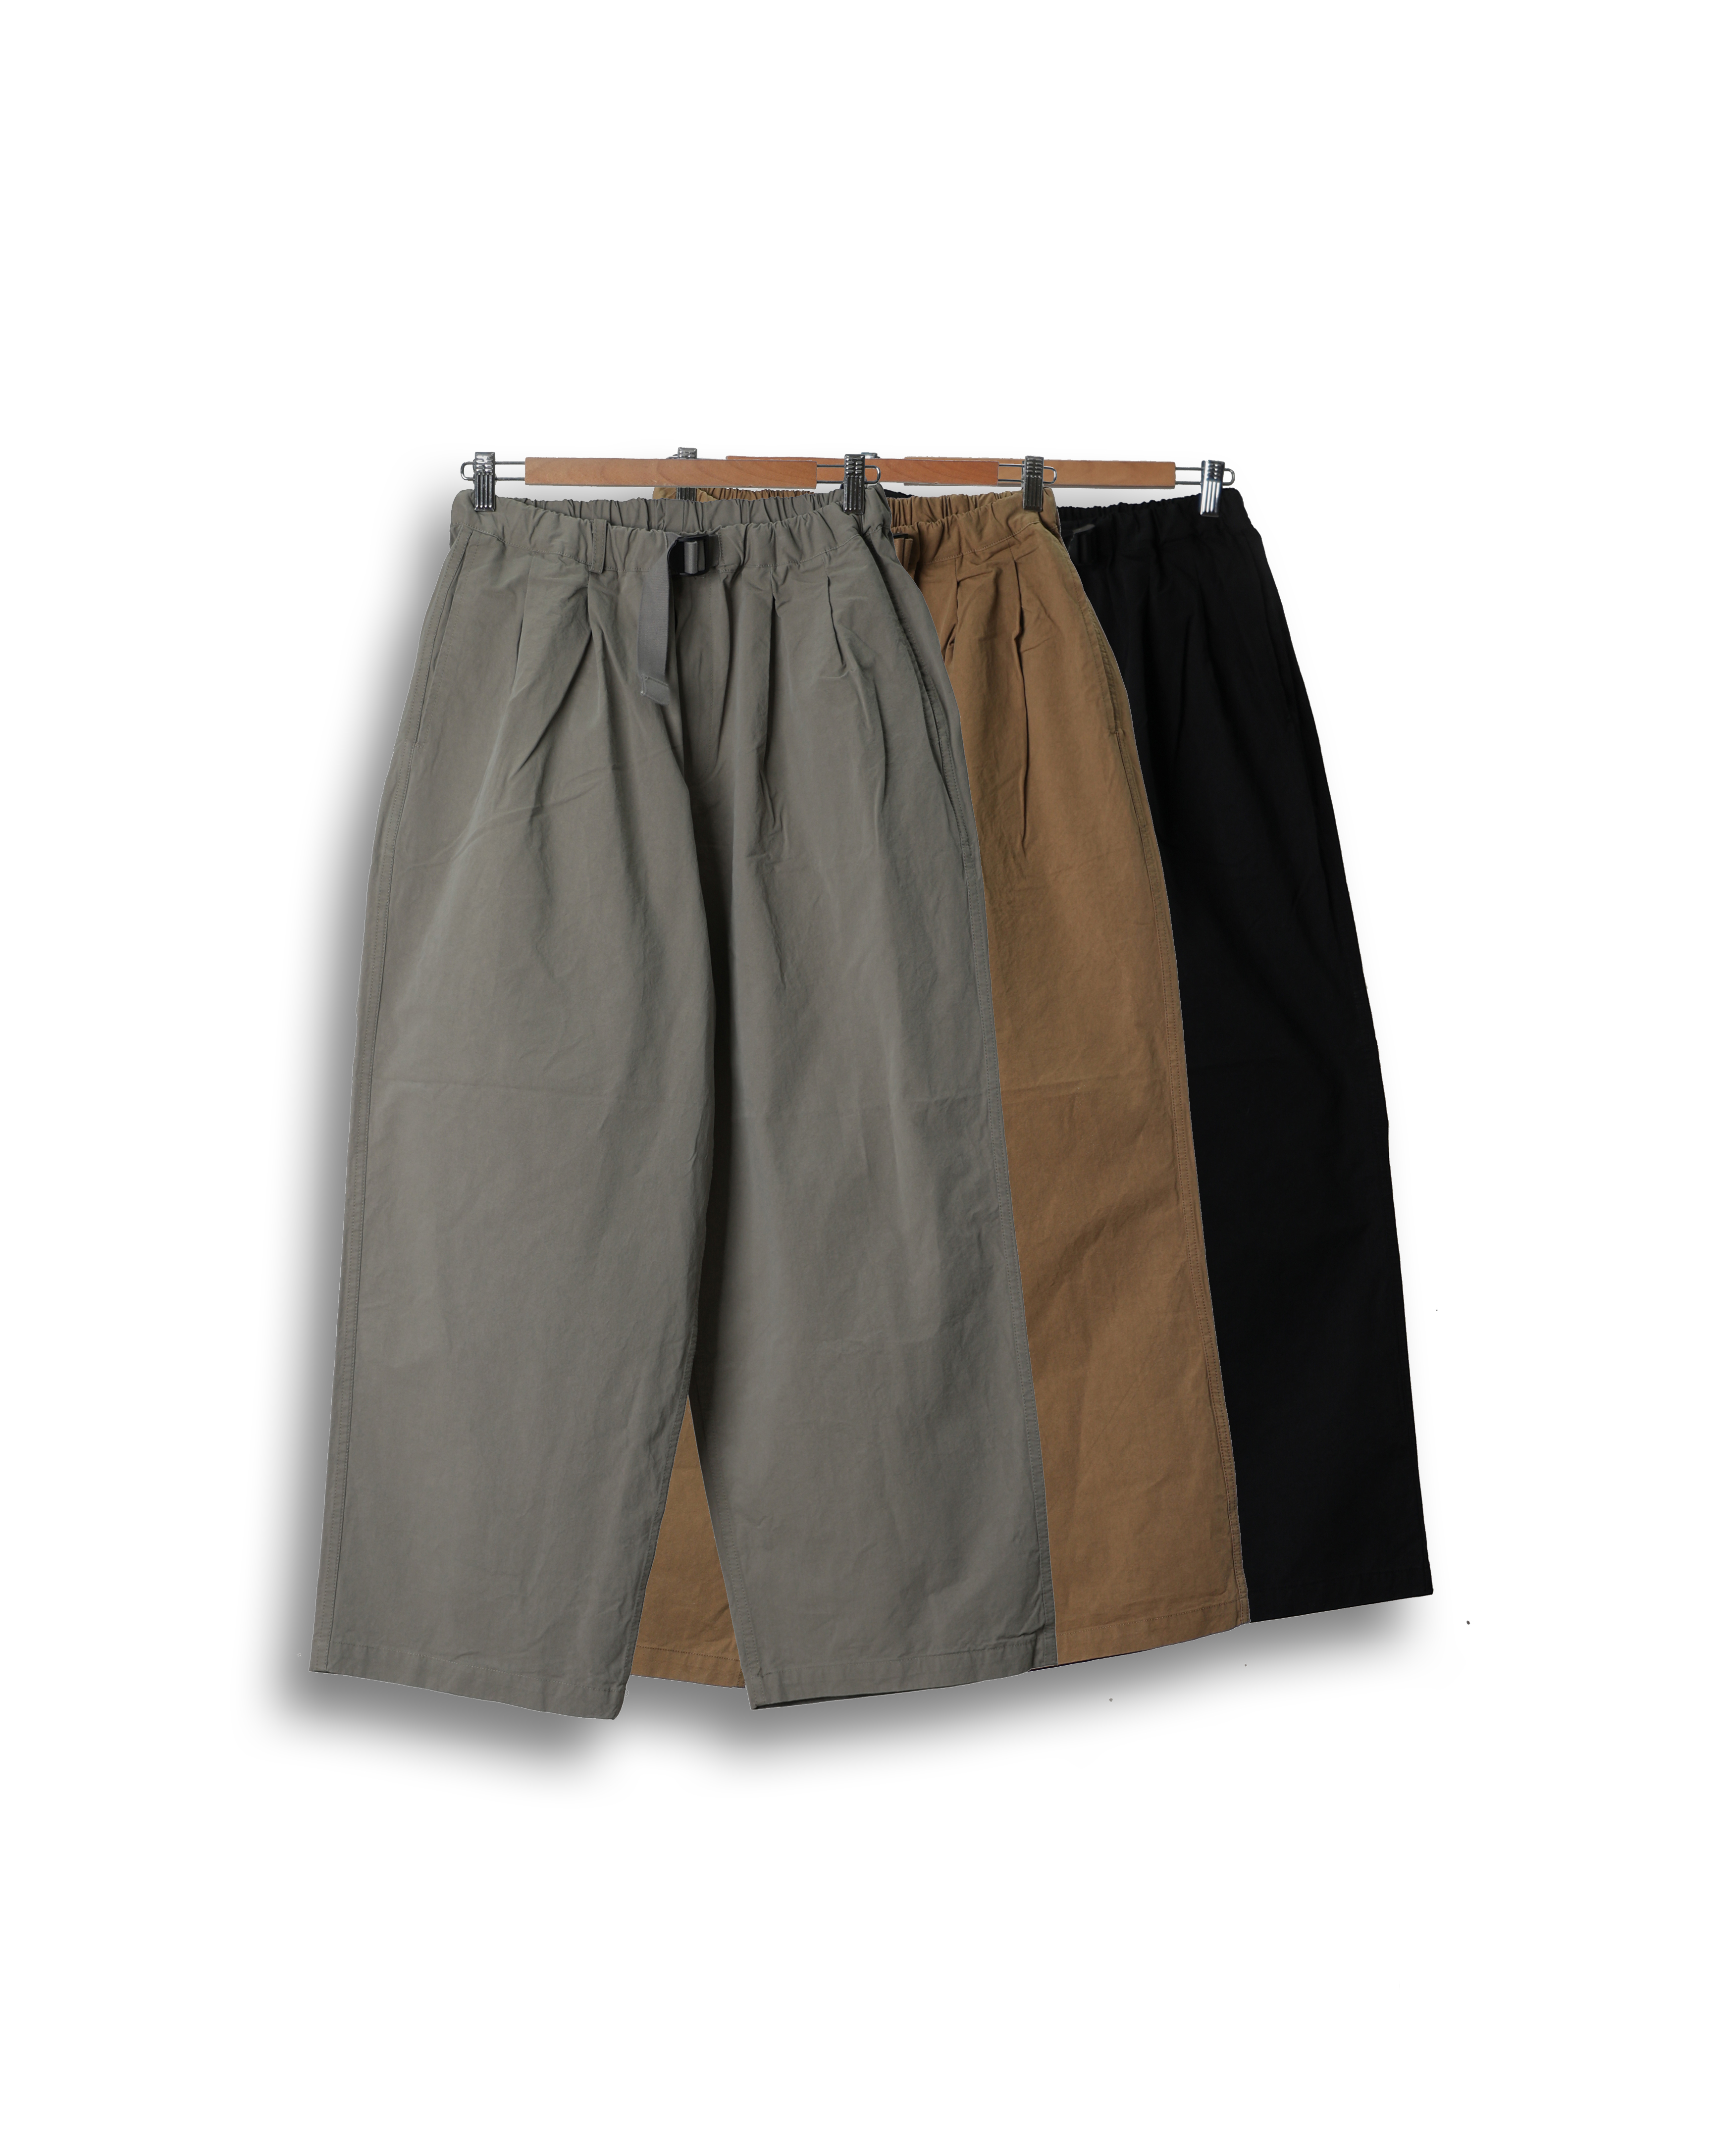 INTO NEOW FRESH Strap Easy Pants (Black/Olive Gray/Beige)